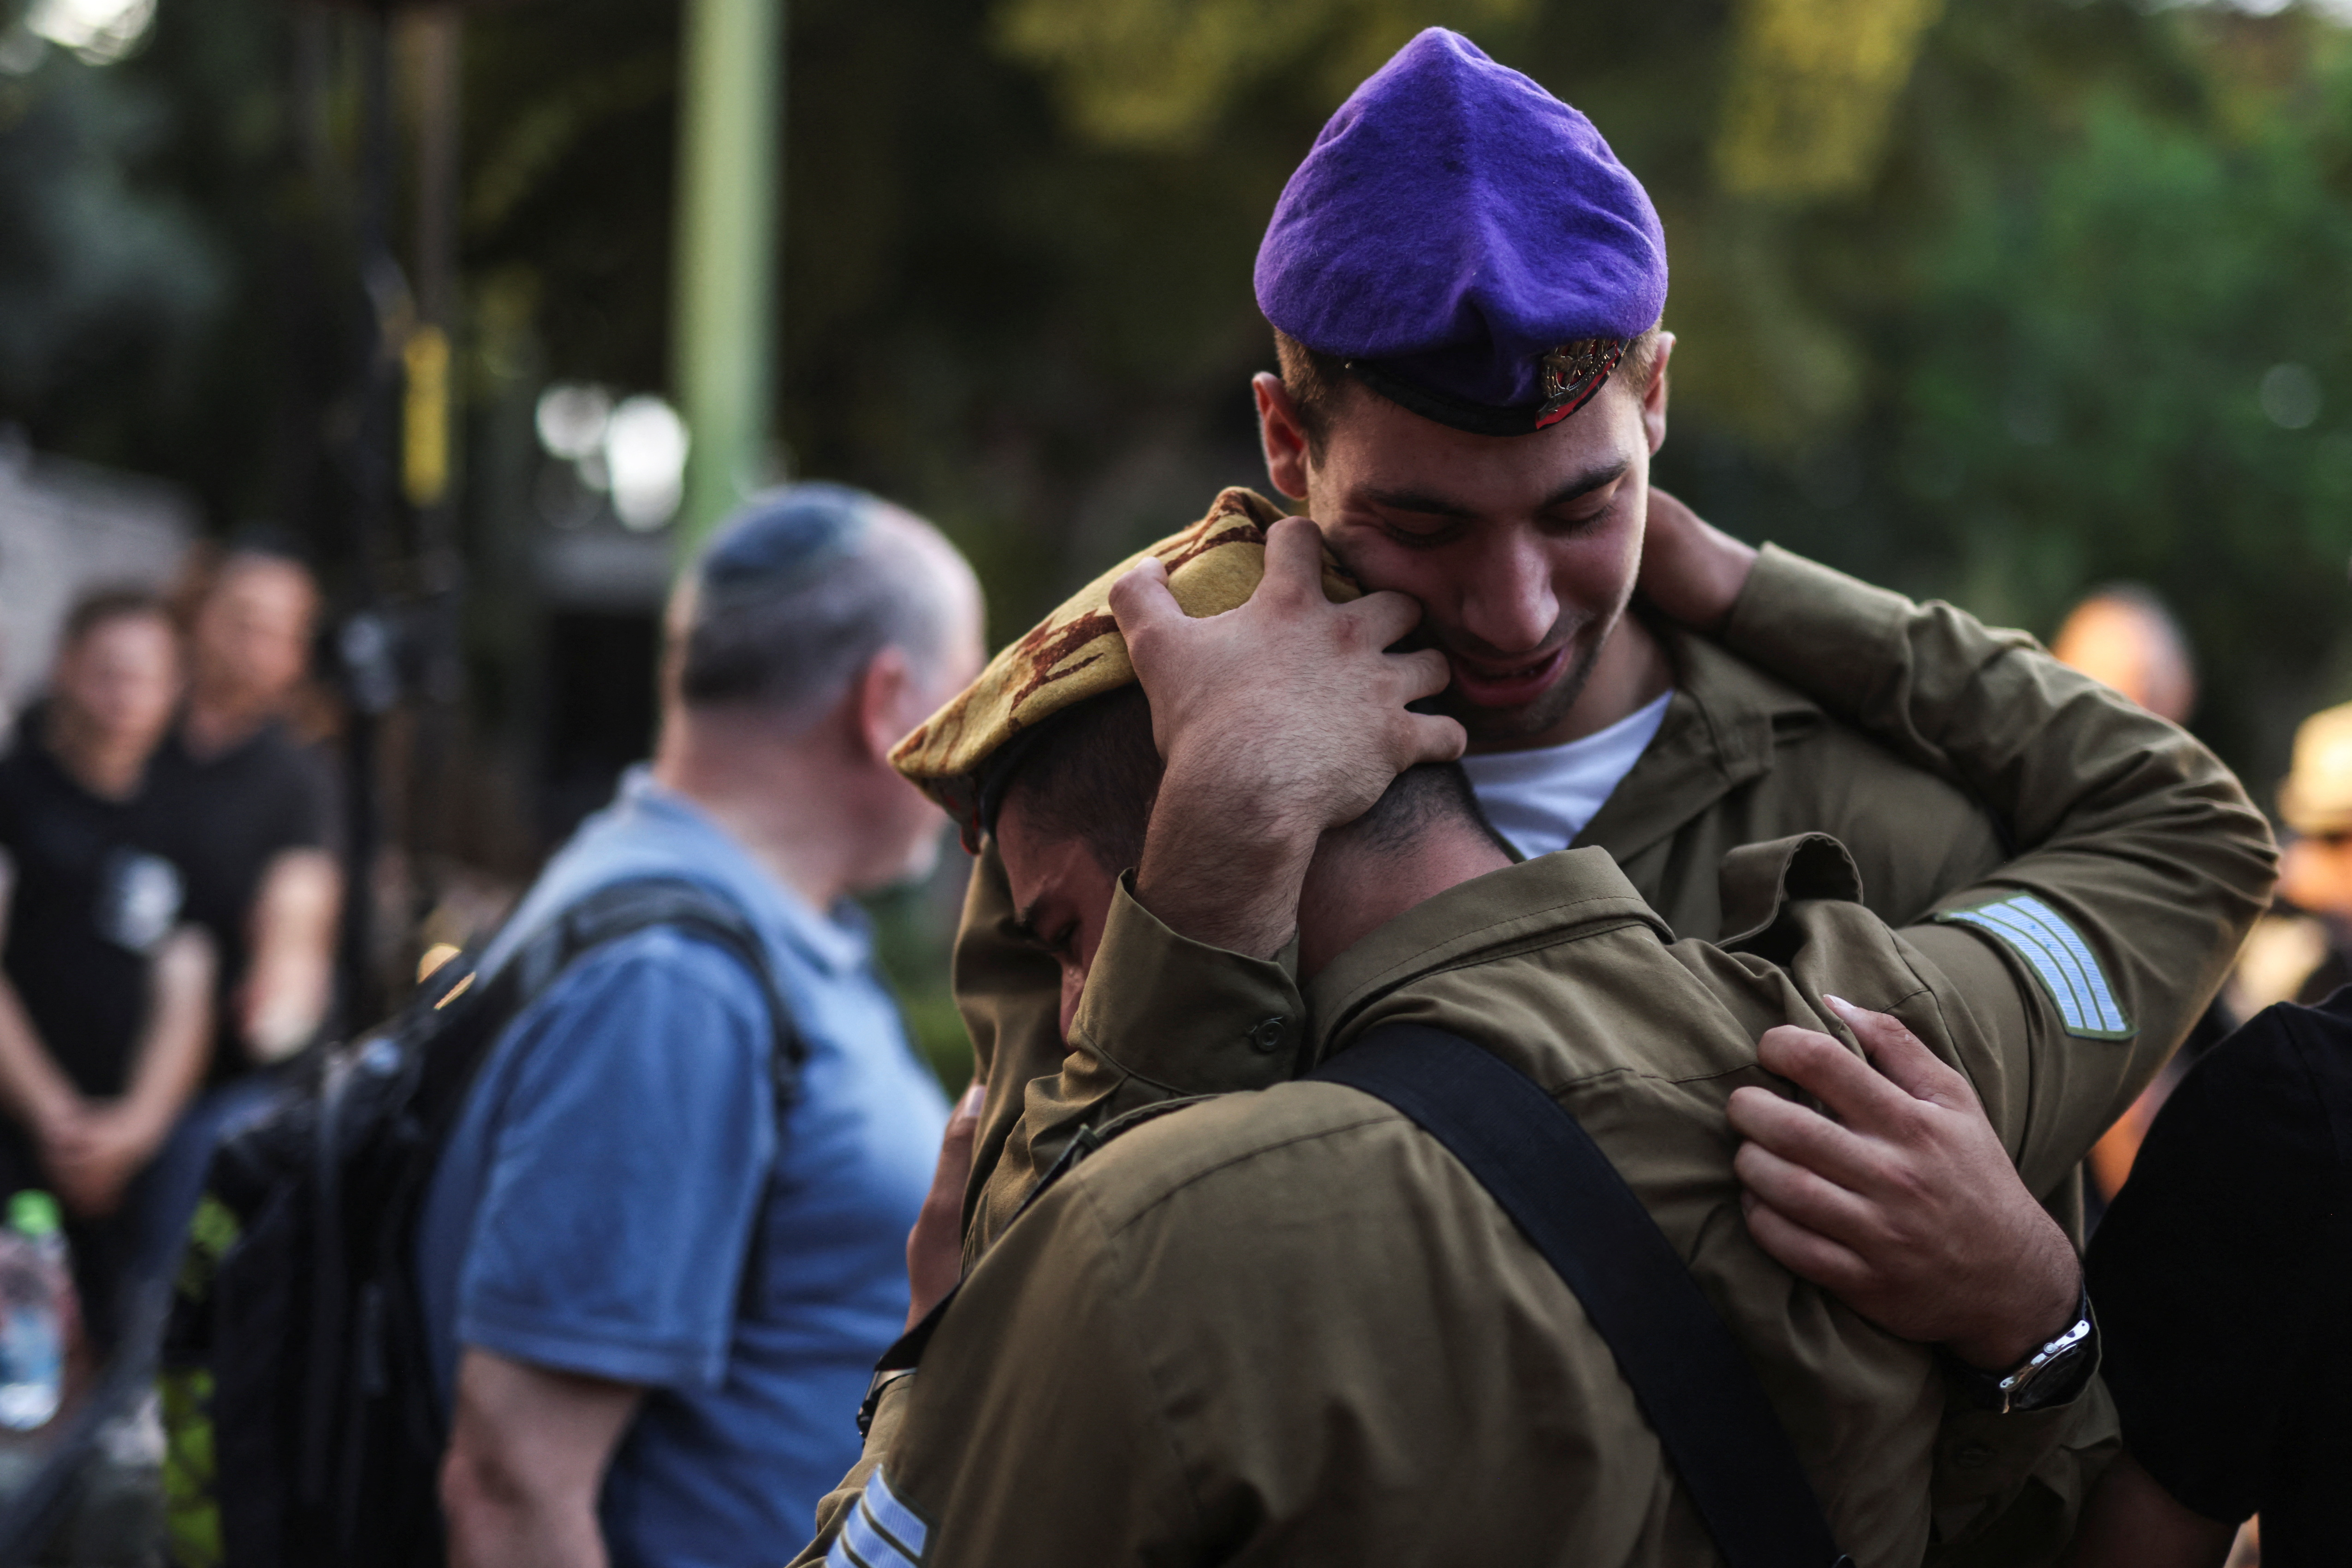 People mourn Ili Bar Sade, a soldier who was killed in an attack by Hamas militants, at his funeral in Tel Aviv